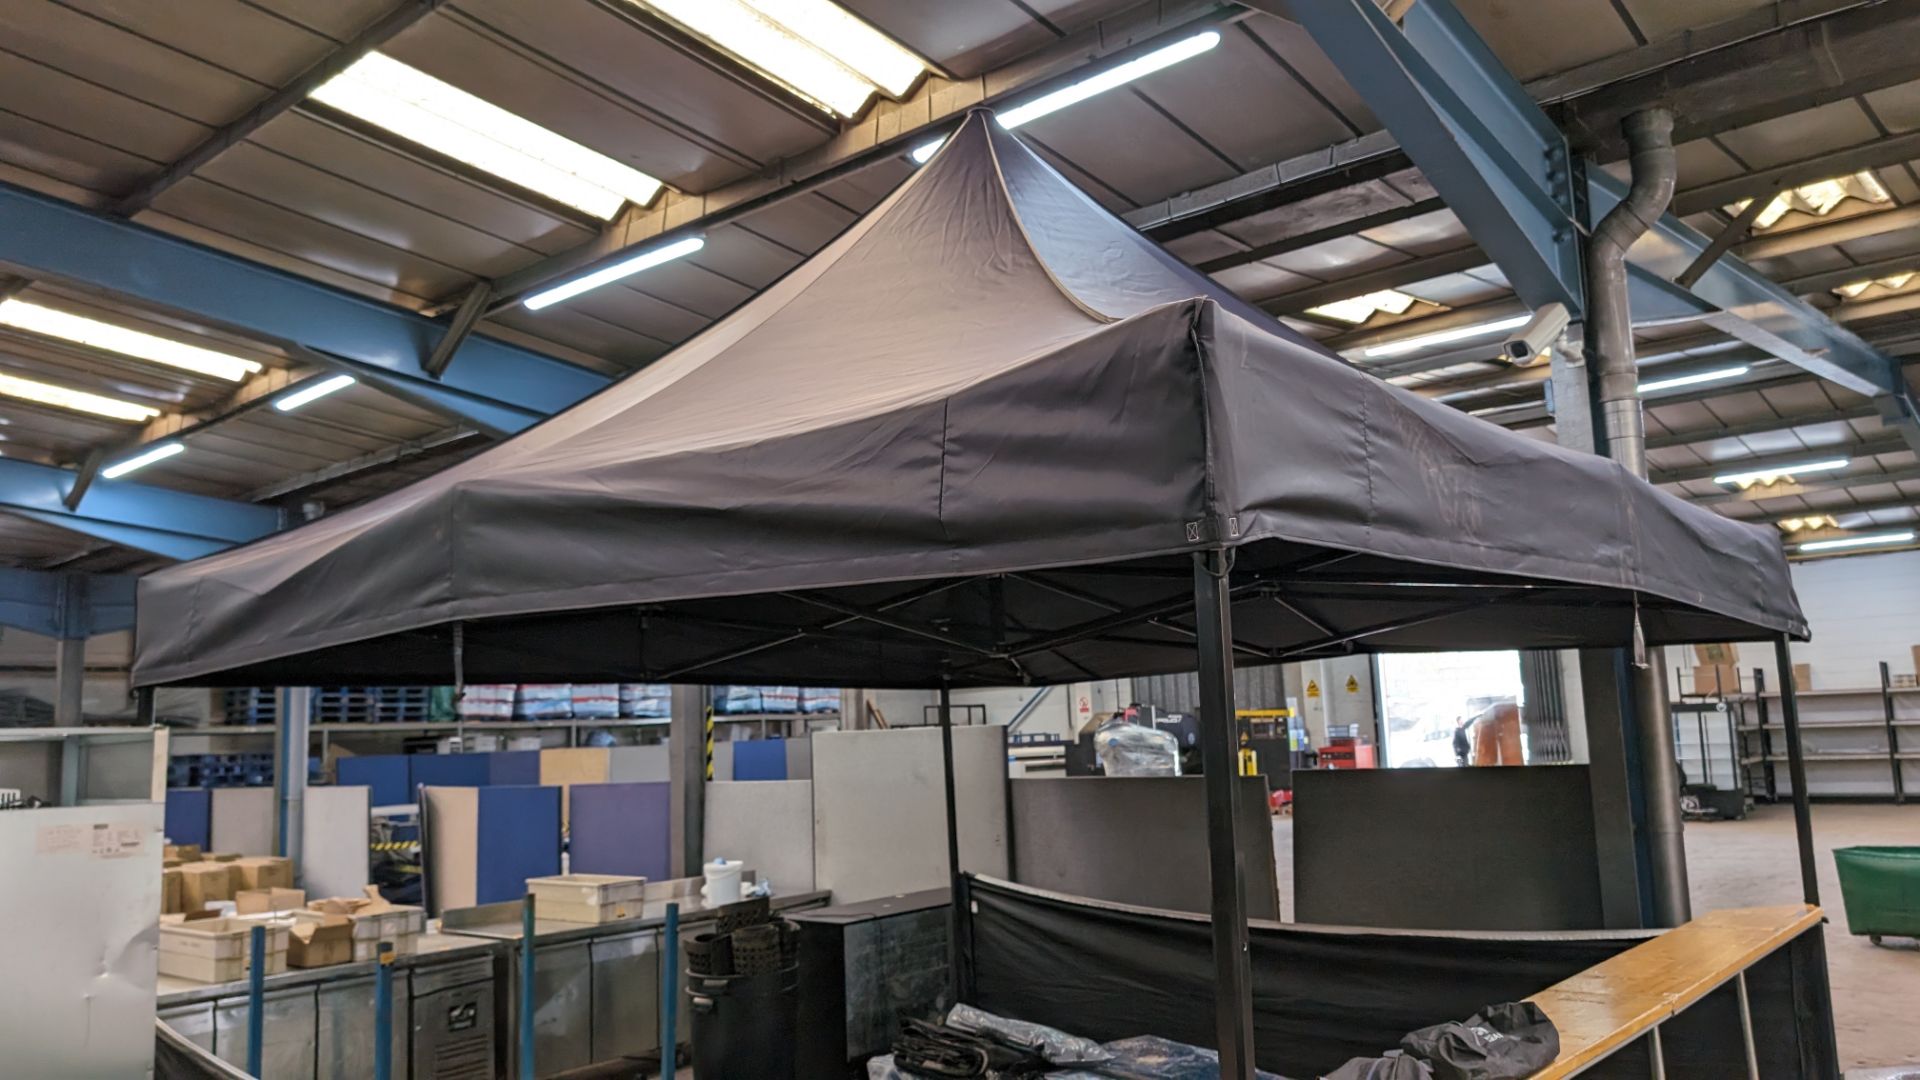 Mastertent 4m x 4m canopy tent (gazebo), bought new in May 2022 for approximately £3,600. This item - Image 13 of 14